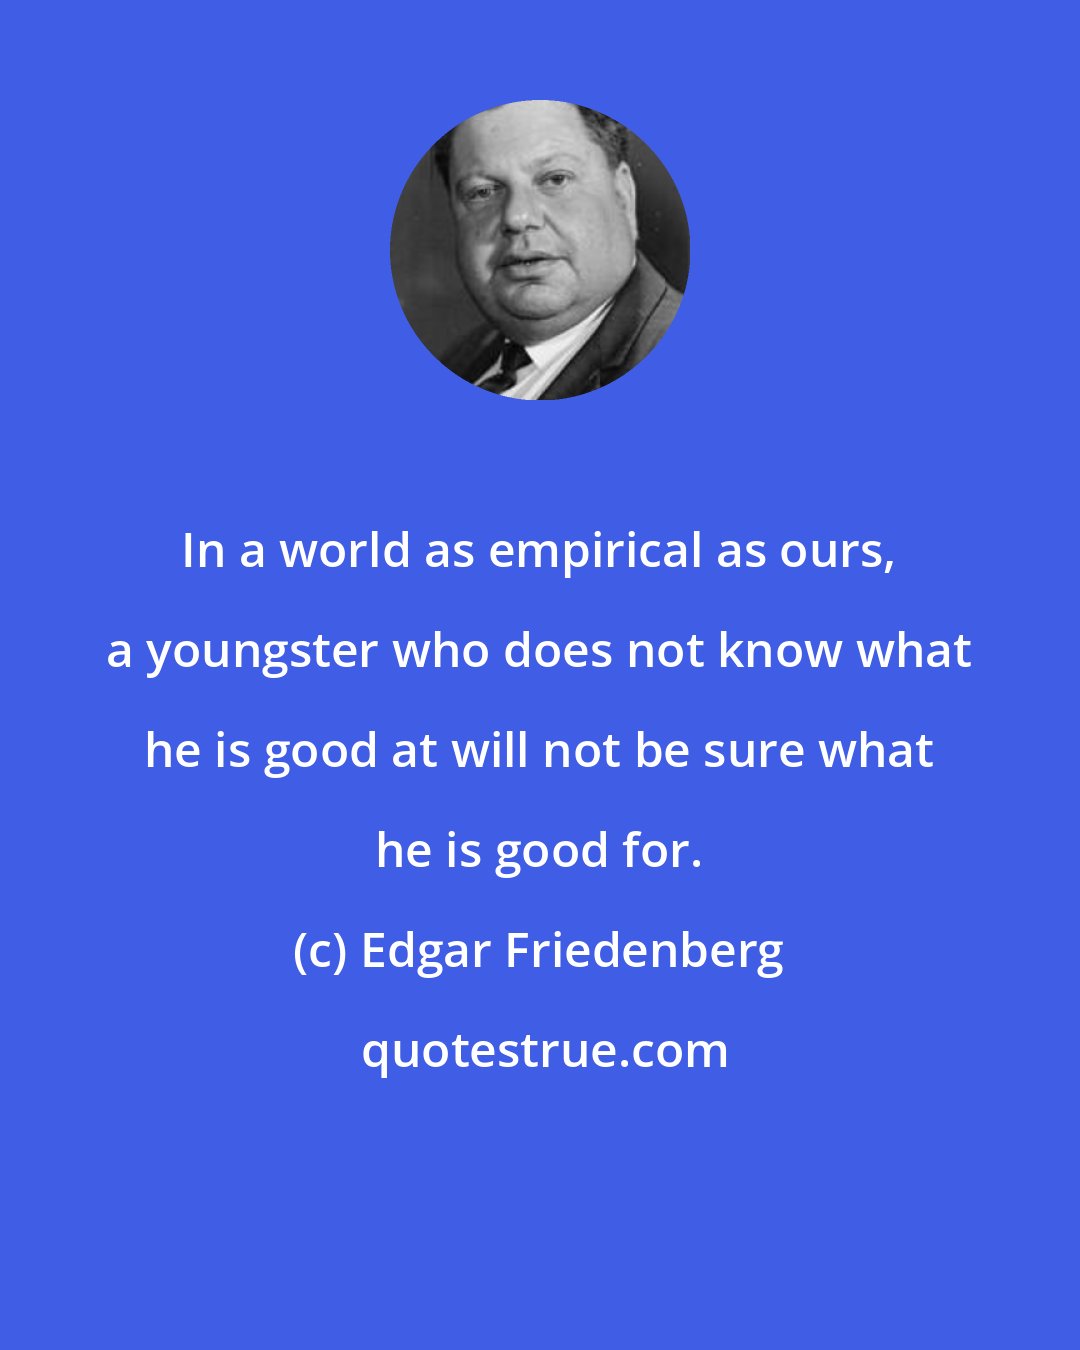 Edgar Friedenberg: In a world as empirical as ours, a youngster who does not know what he is good at will not be sure what he is good for.